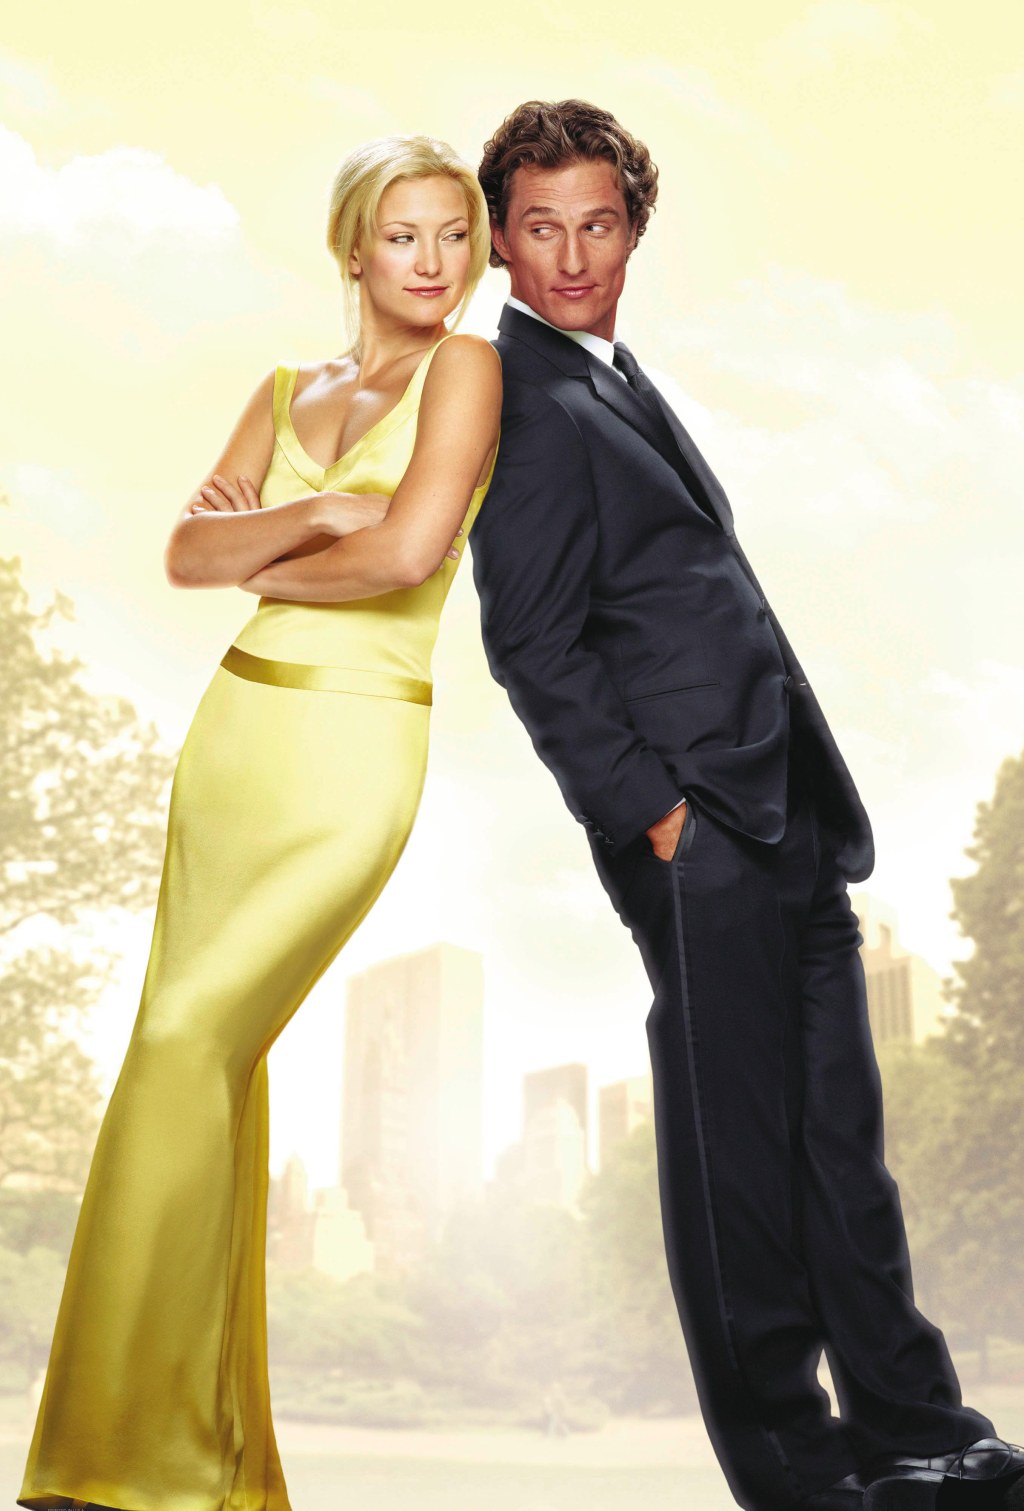 How to Lose a Guy in 10 Days, Kate Hudson, Matthew McConaughey